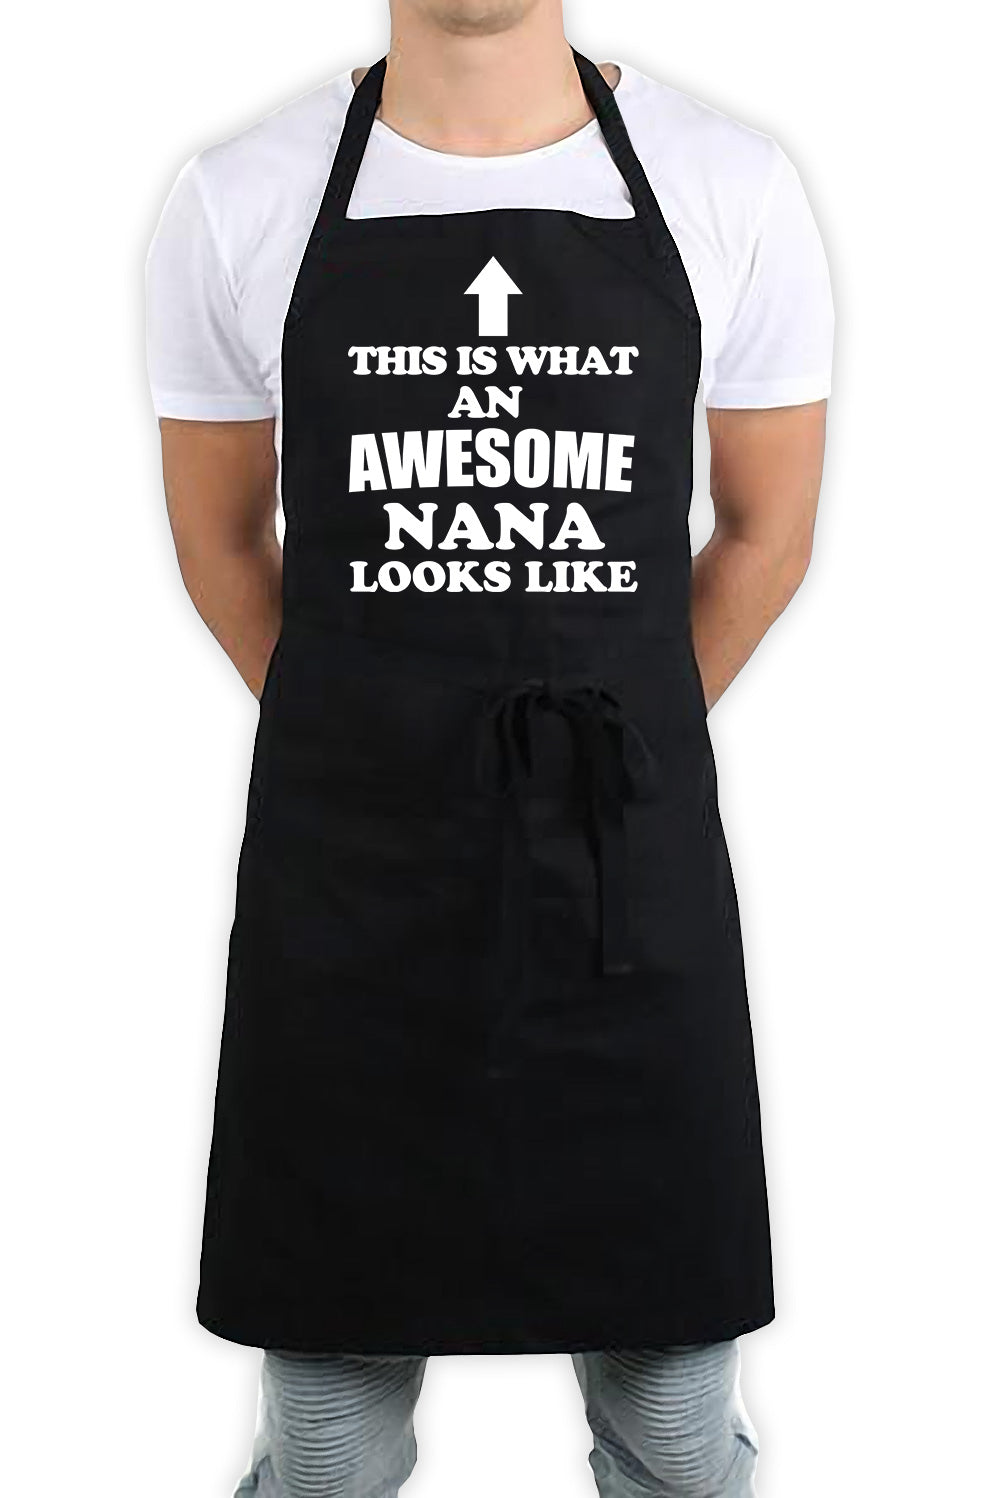 This Is What An Awesome Nana Looks Like Funny Kitchen BBQ Apron Black